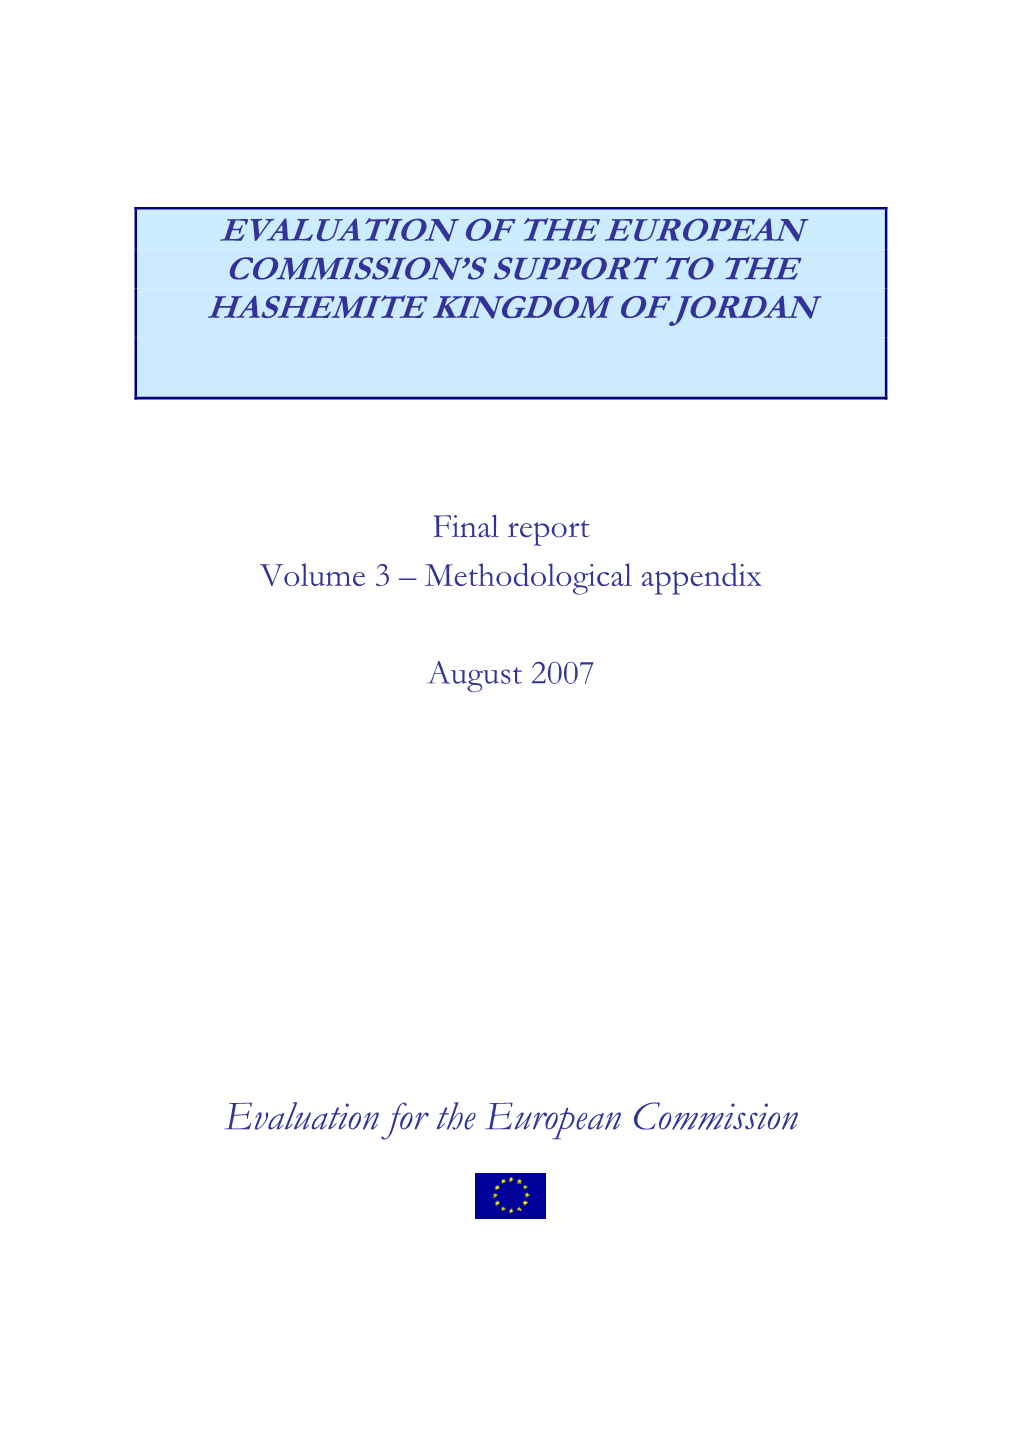 Evaluation for the European Commission